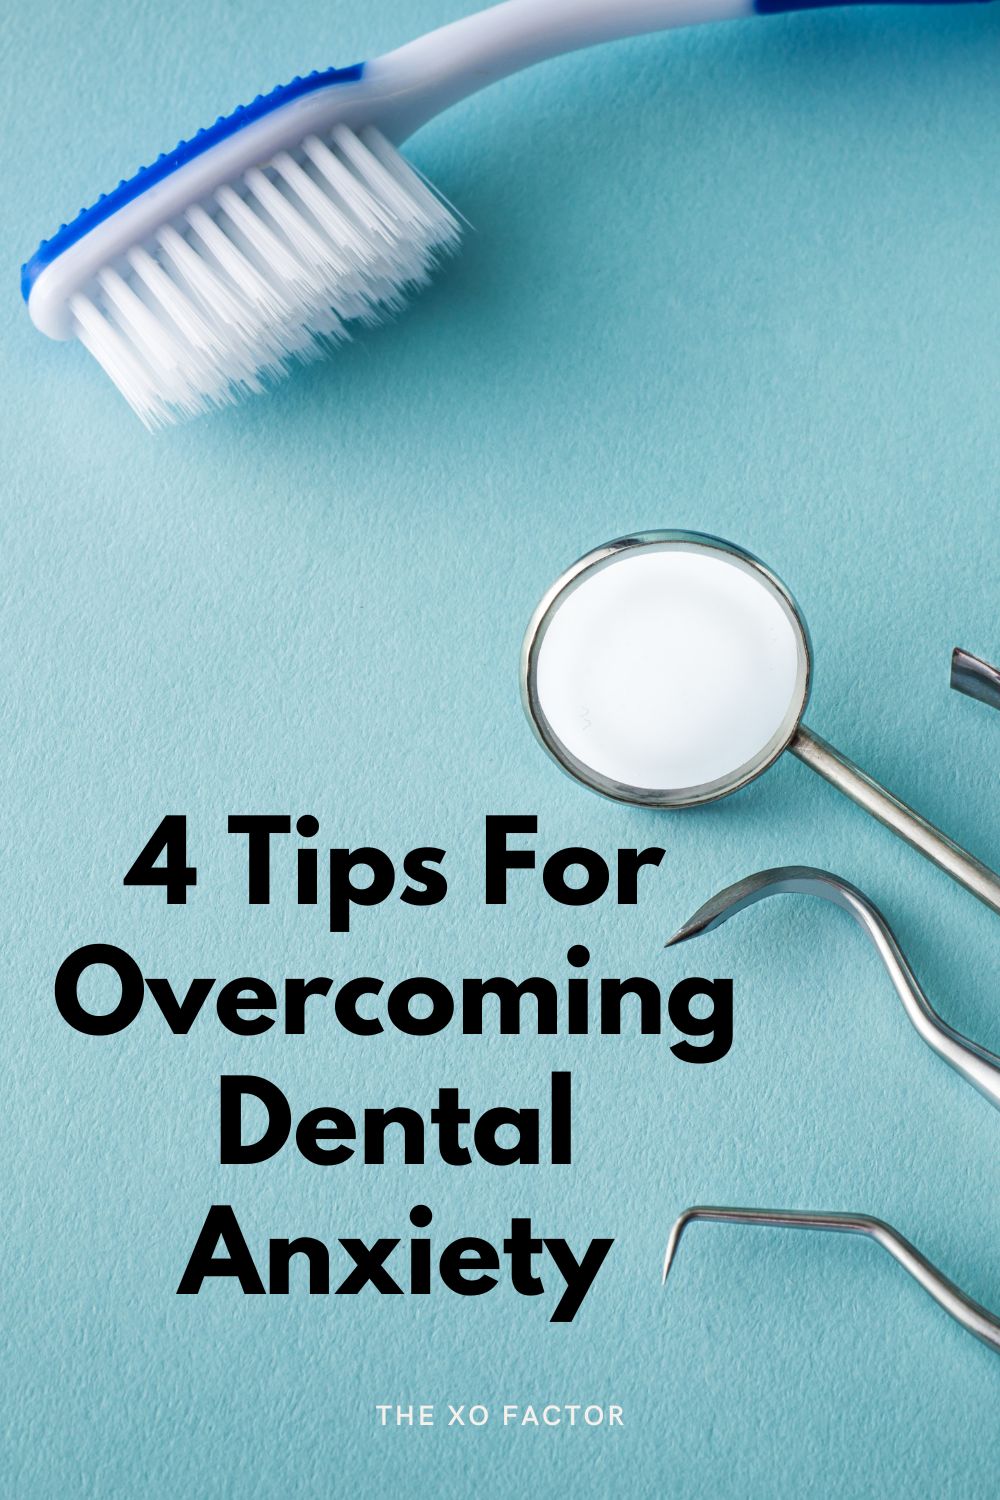 4 tips to help overcome dental anxiety